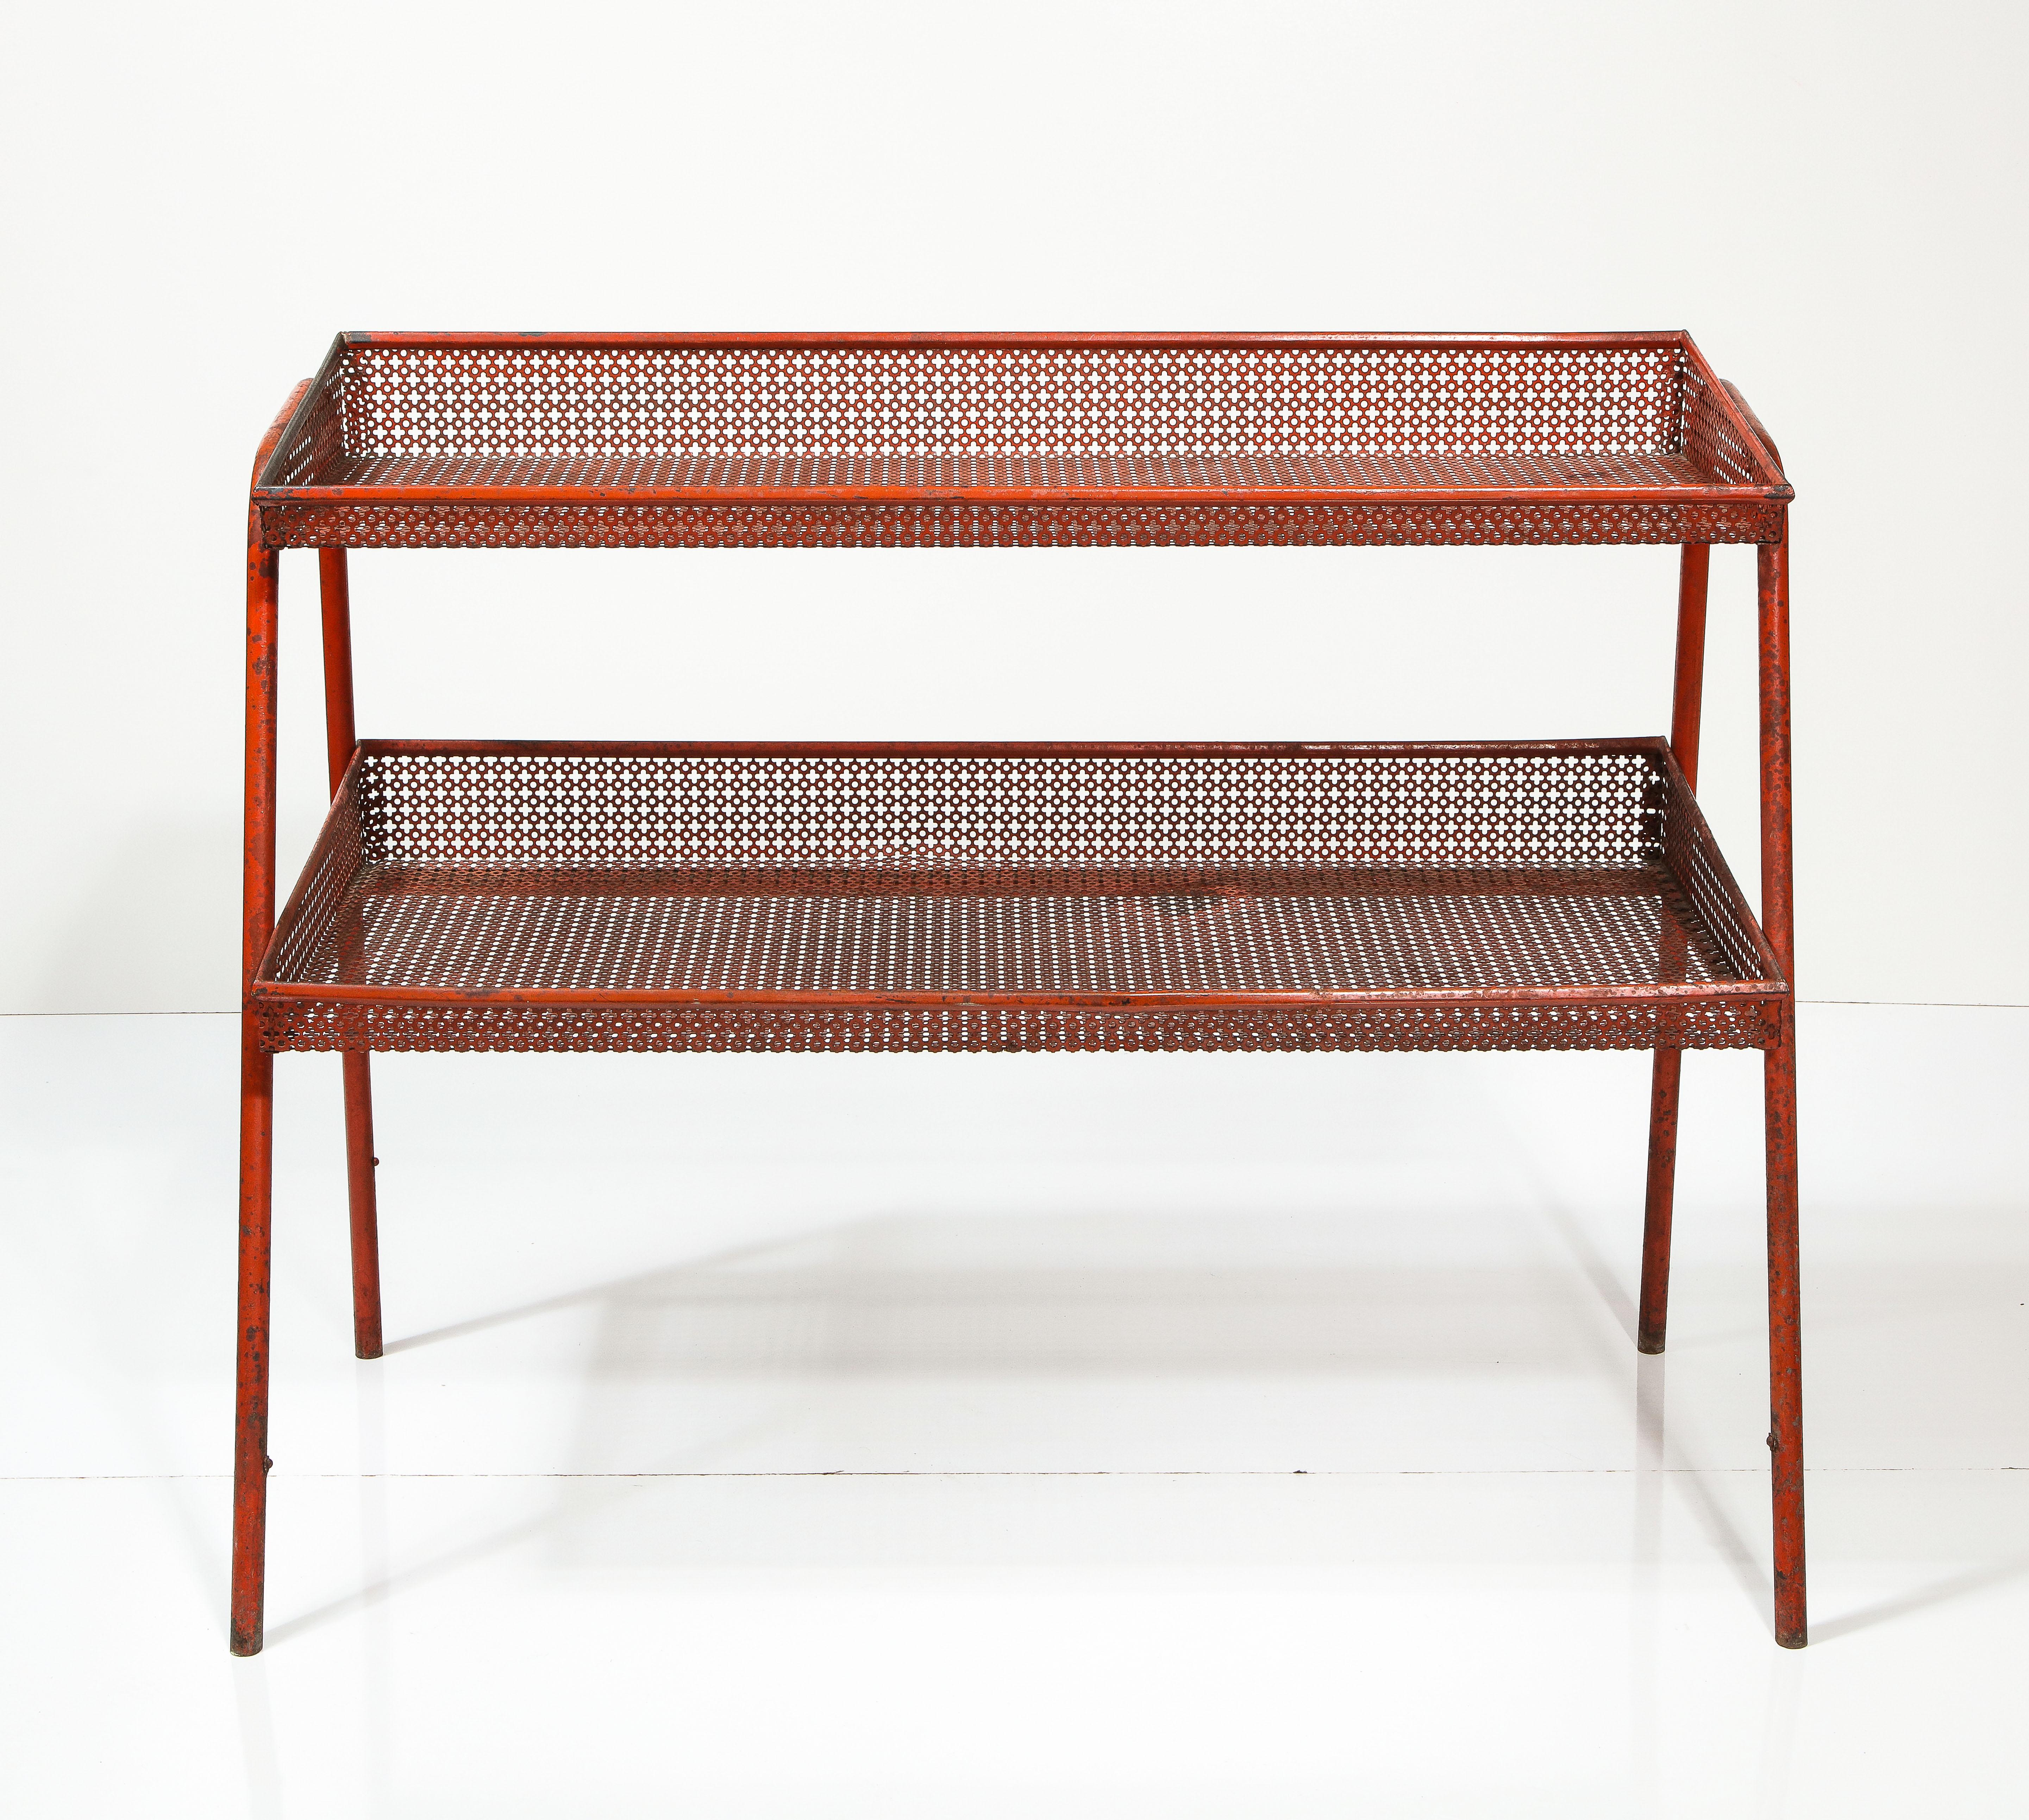 Painted, patinated red metal shelf with unique hole pattern, attributed to Mathieu Mategot